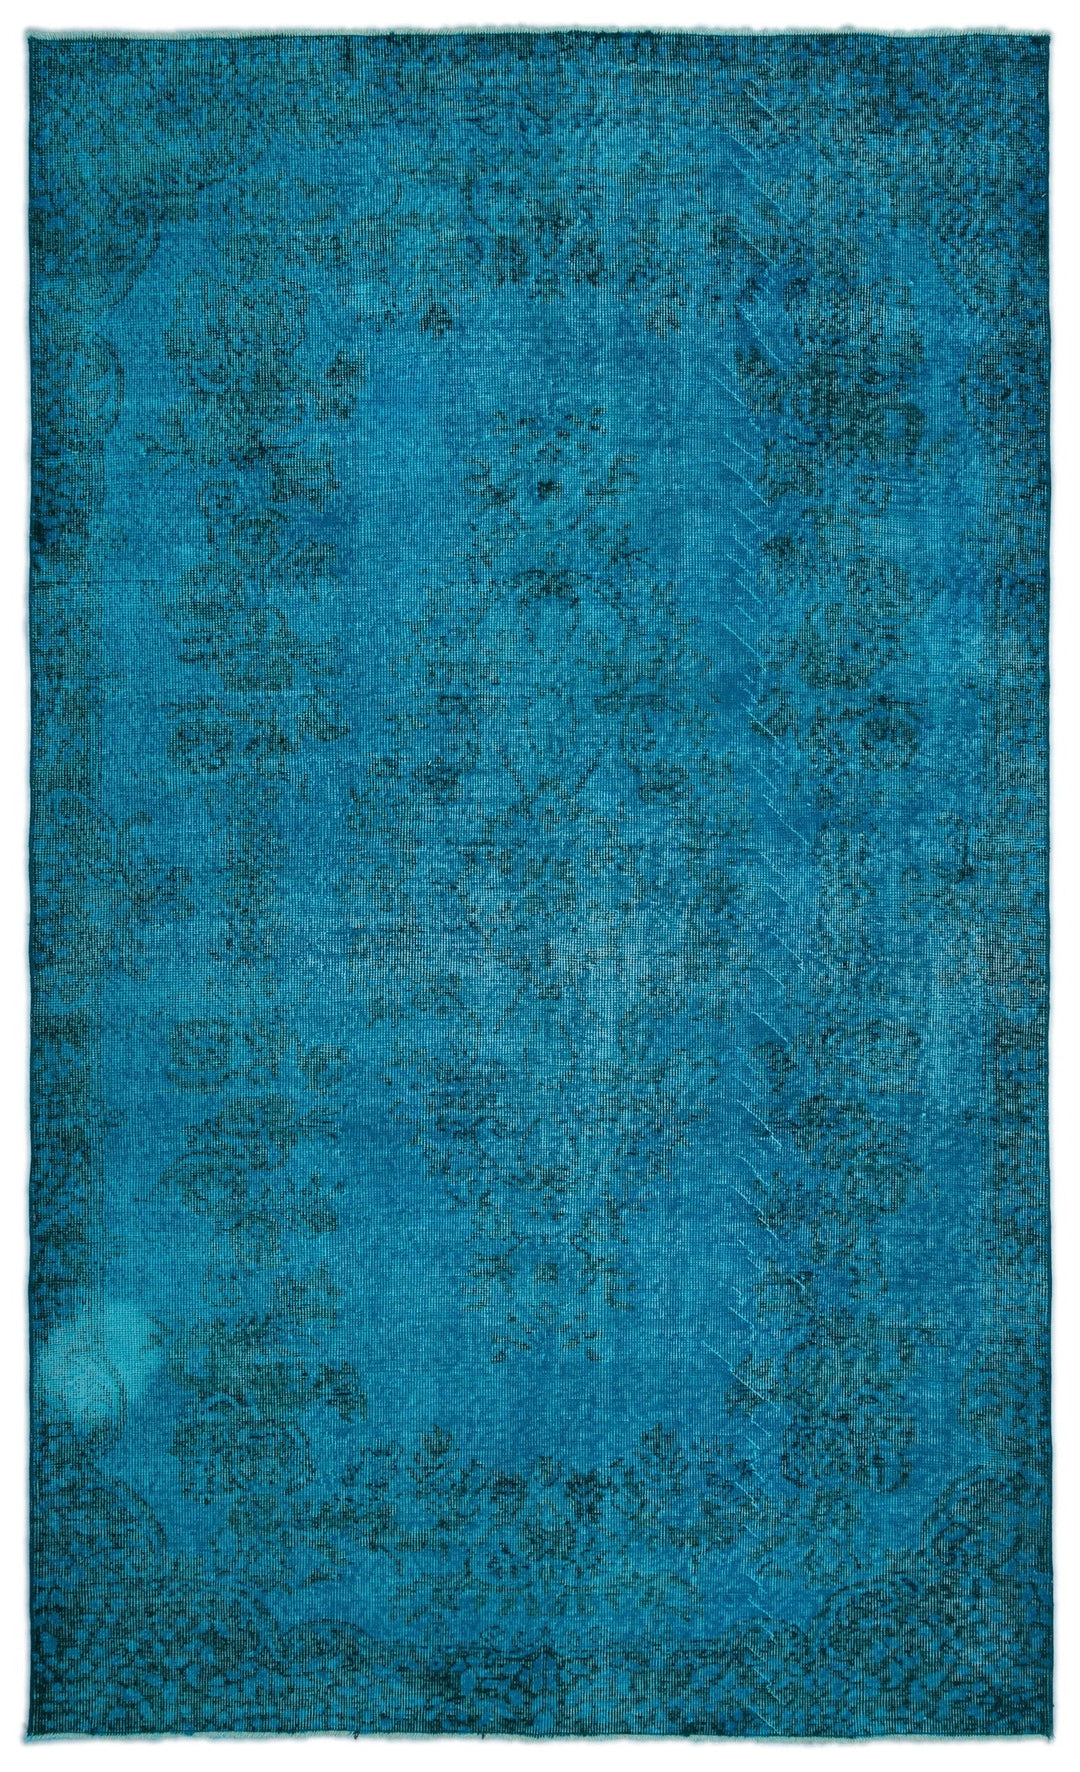 Athens Turquoise Tumbled Wool Hand Woven Carpet 168 x 280